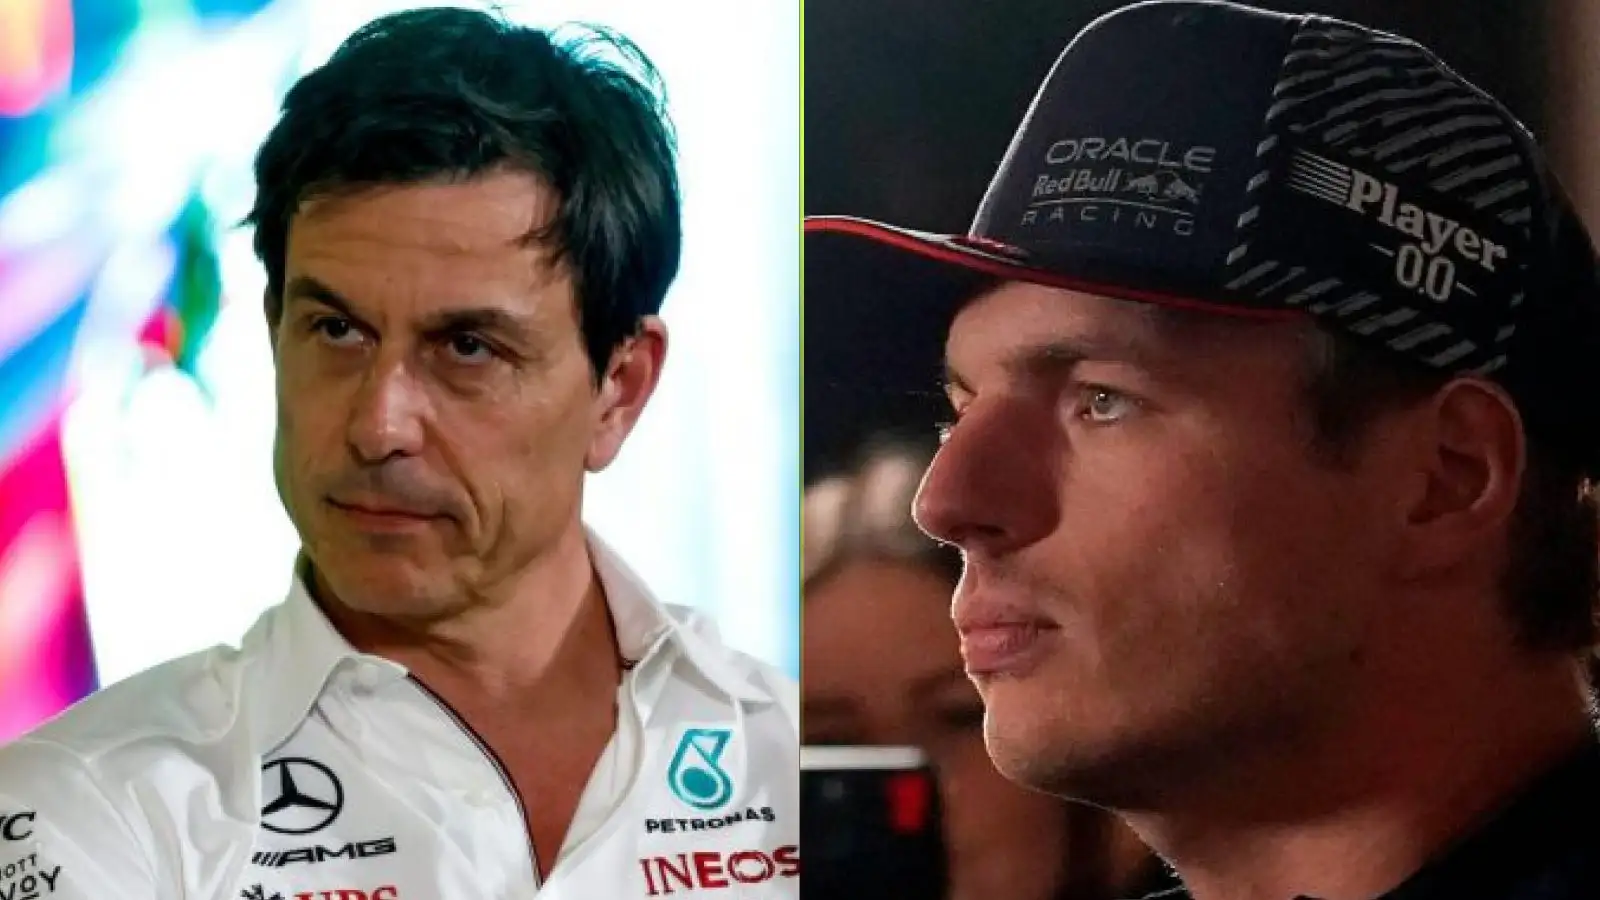 ‘Pissed’ Toto Wolff decided on Lewis Hamilton replacement due to Max Verstappen frustration, claims F1 pundit